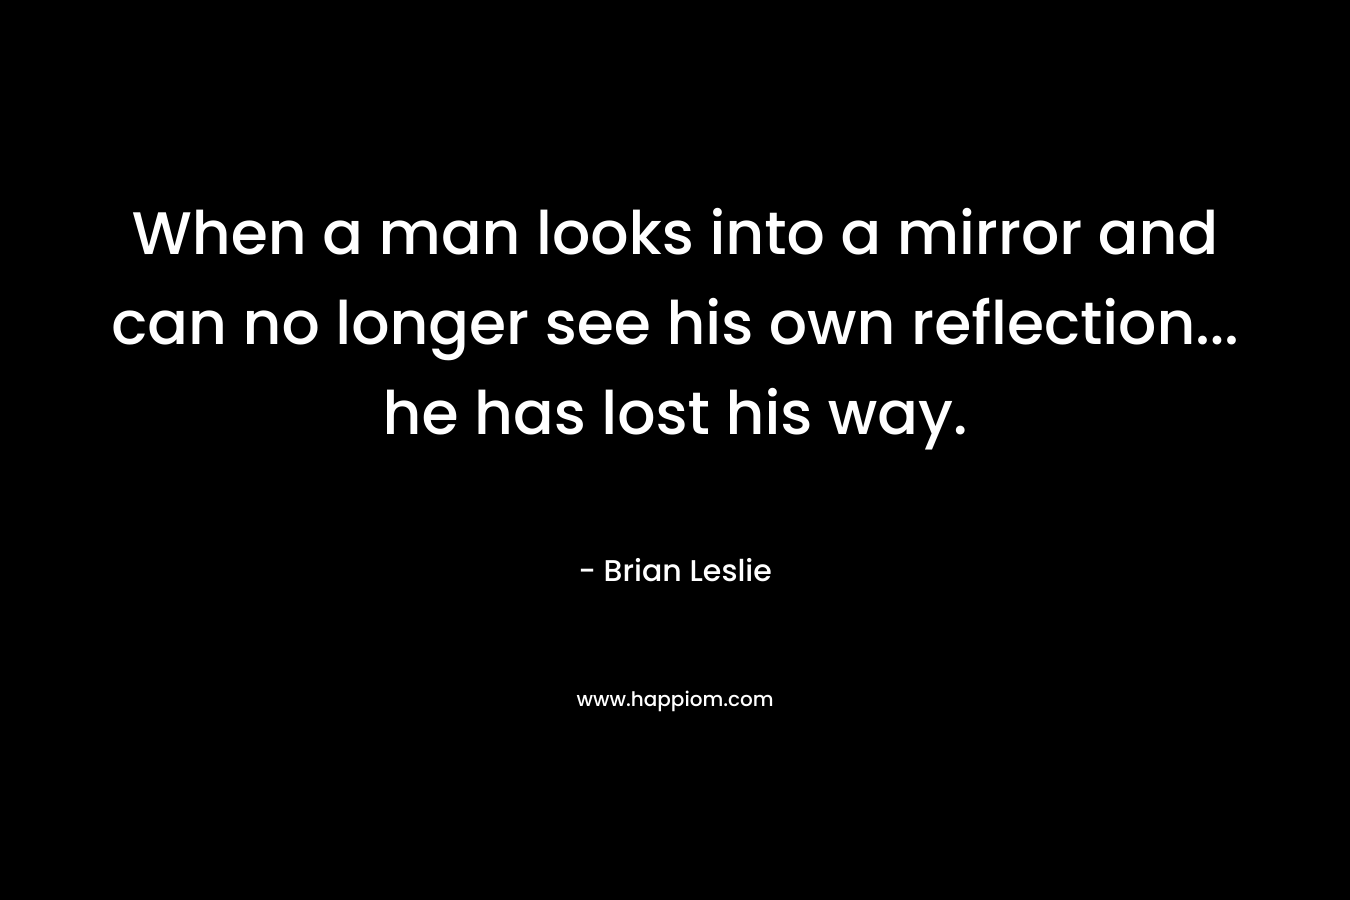 When a man looks into a mirror and can no longer see his own reflection… he has lost his way. – Brian Leslie